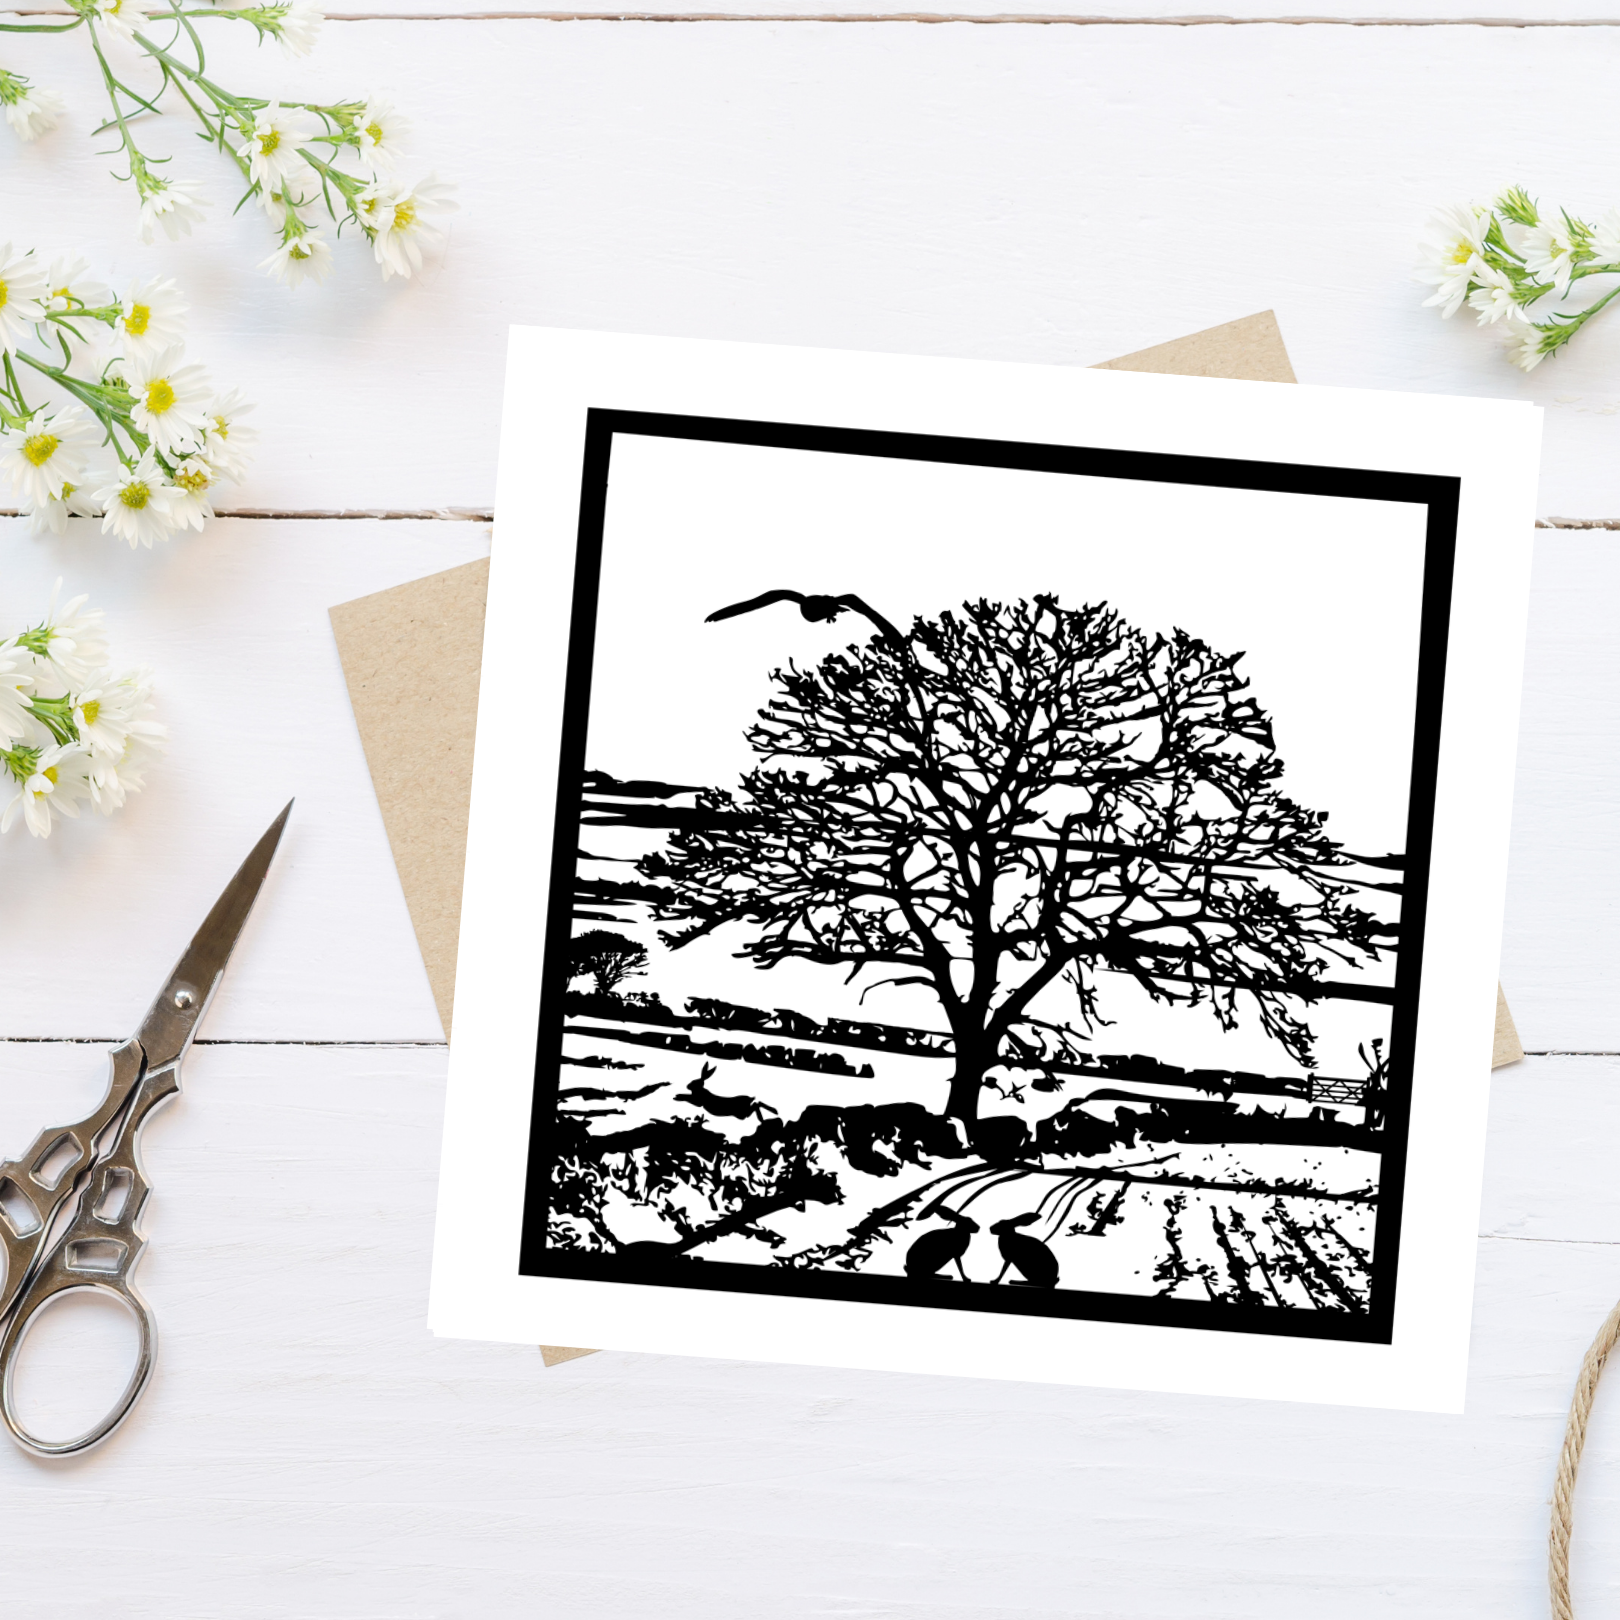 Greetings Card by PaperStory Norfolk Landscape